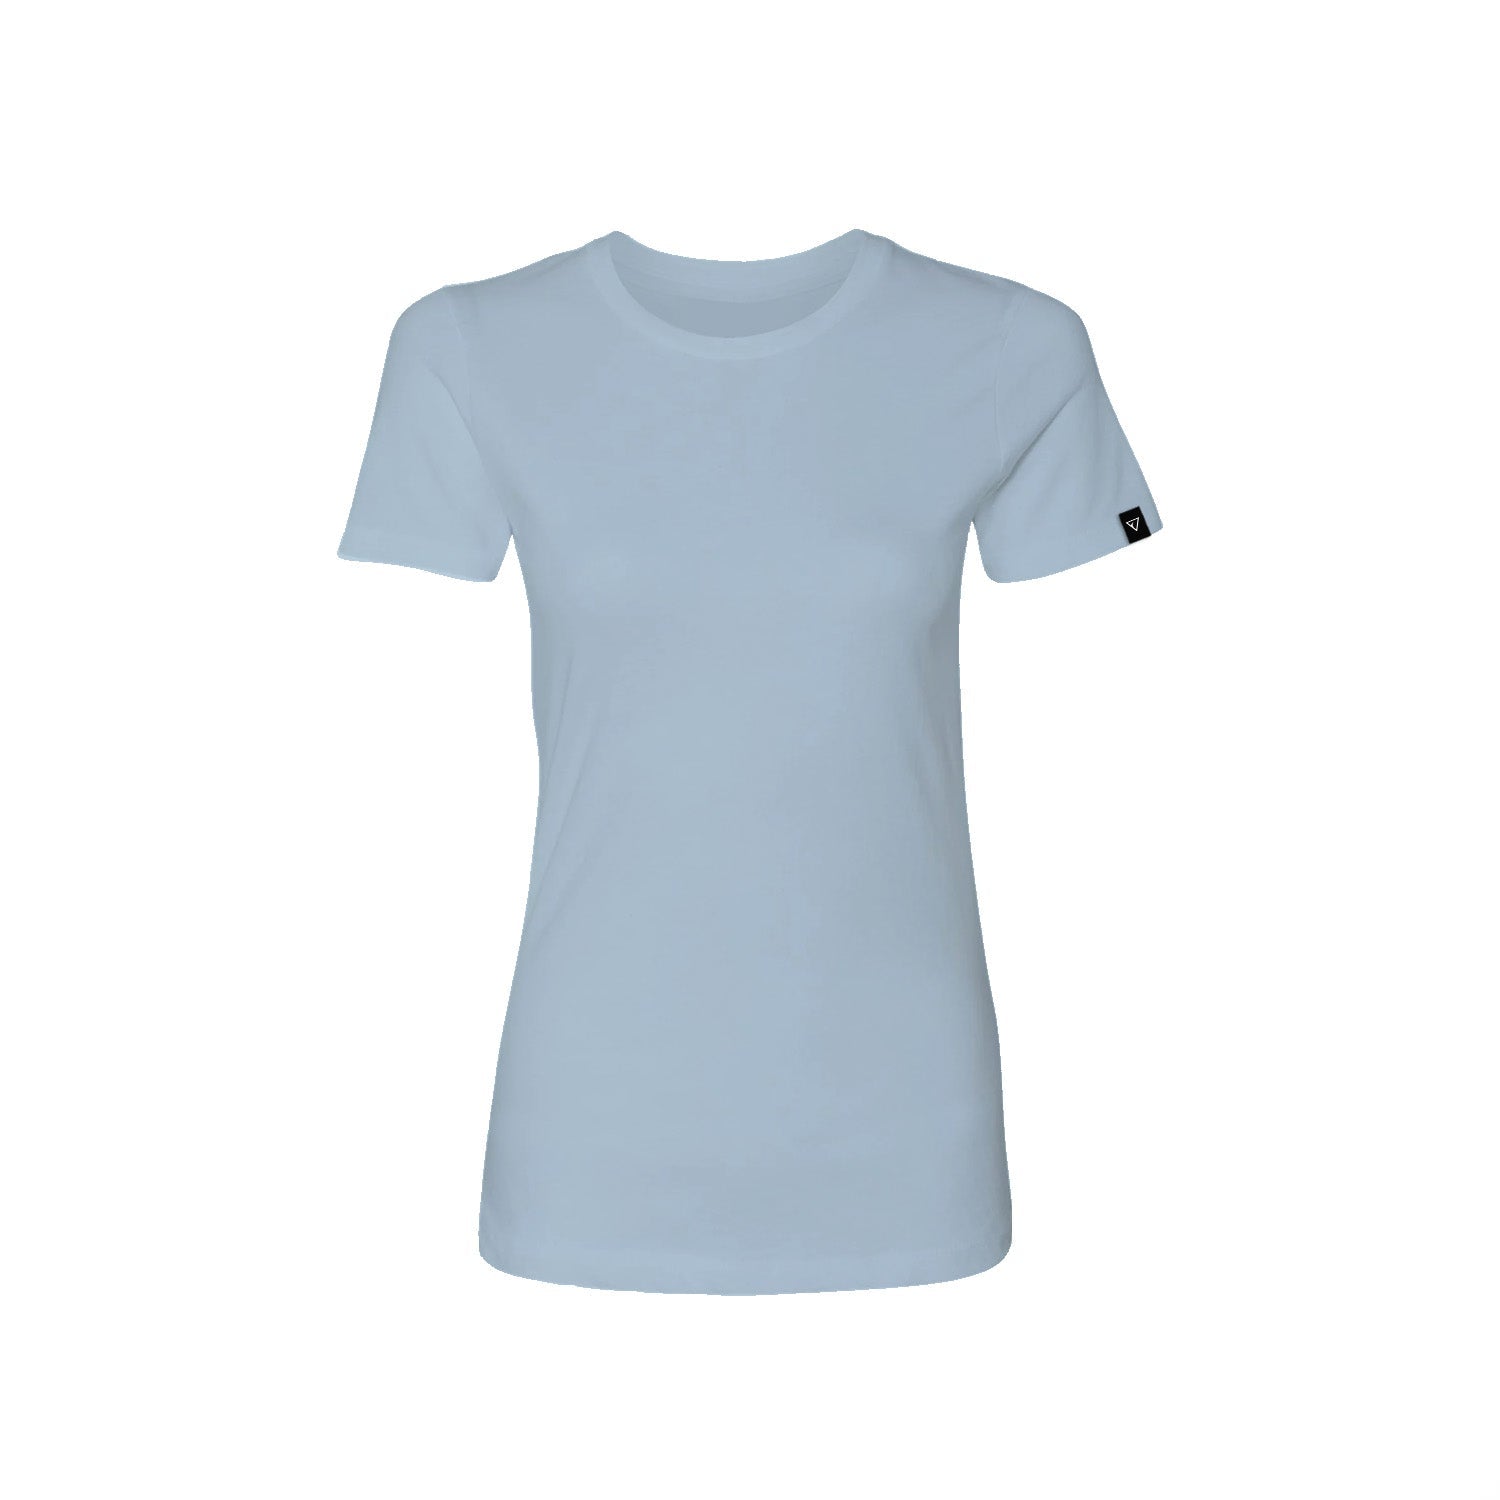 Seatec Outfitters Womens WOMEN'S ACTIVE | SKY BLUE | SS CREW